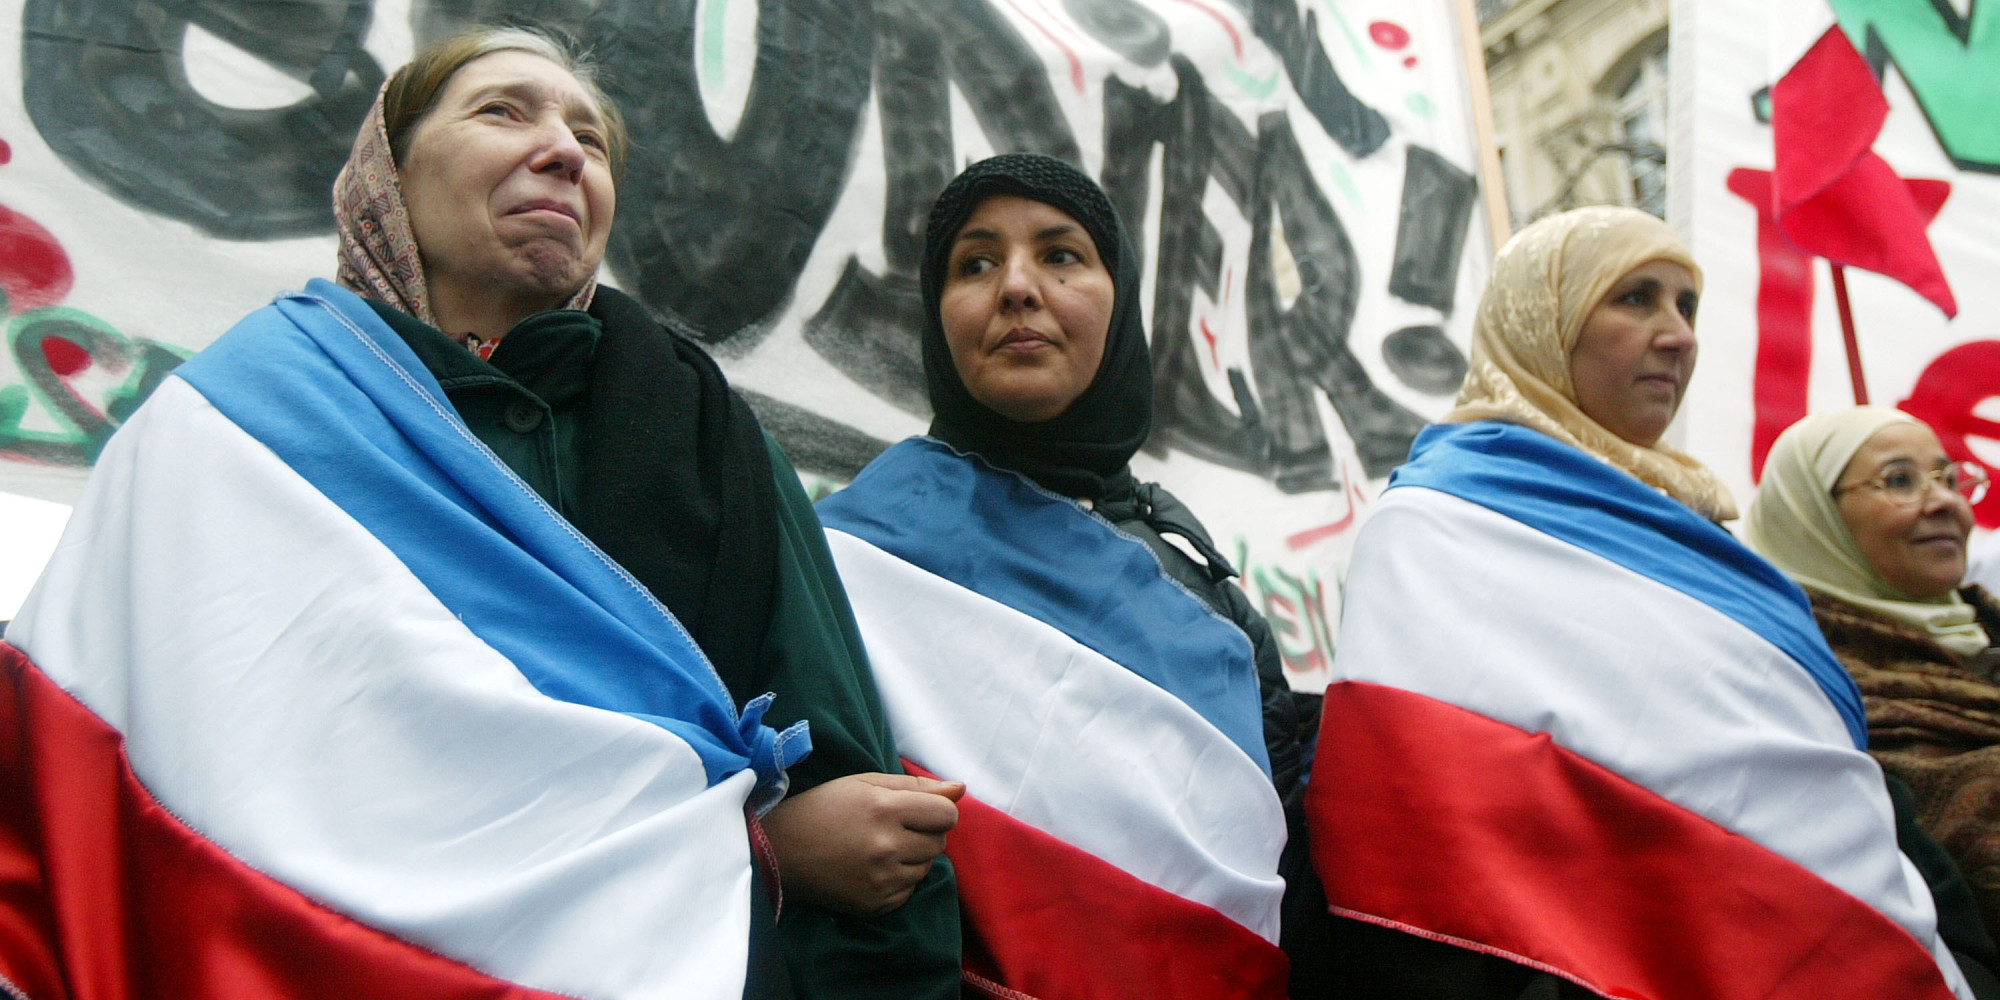 French Muslims Struggle To Feel Accepted By Their Country After Charlie